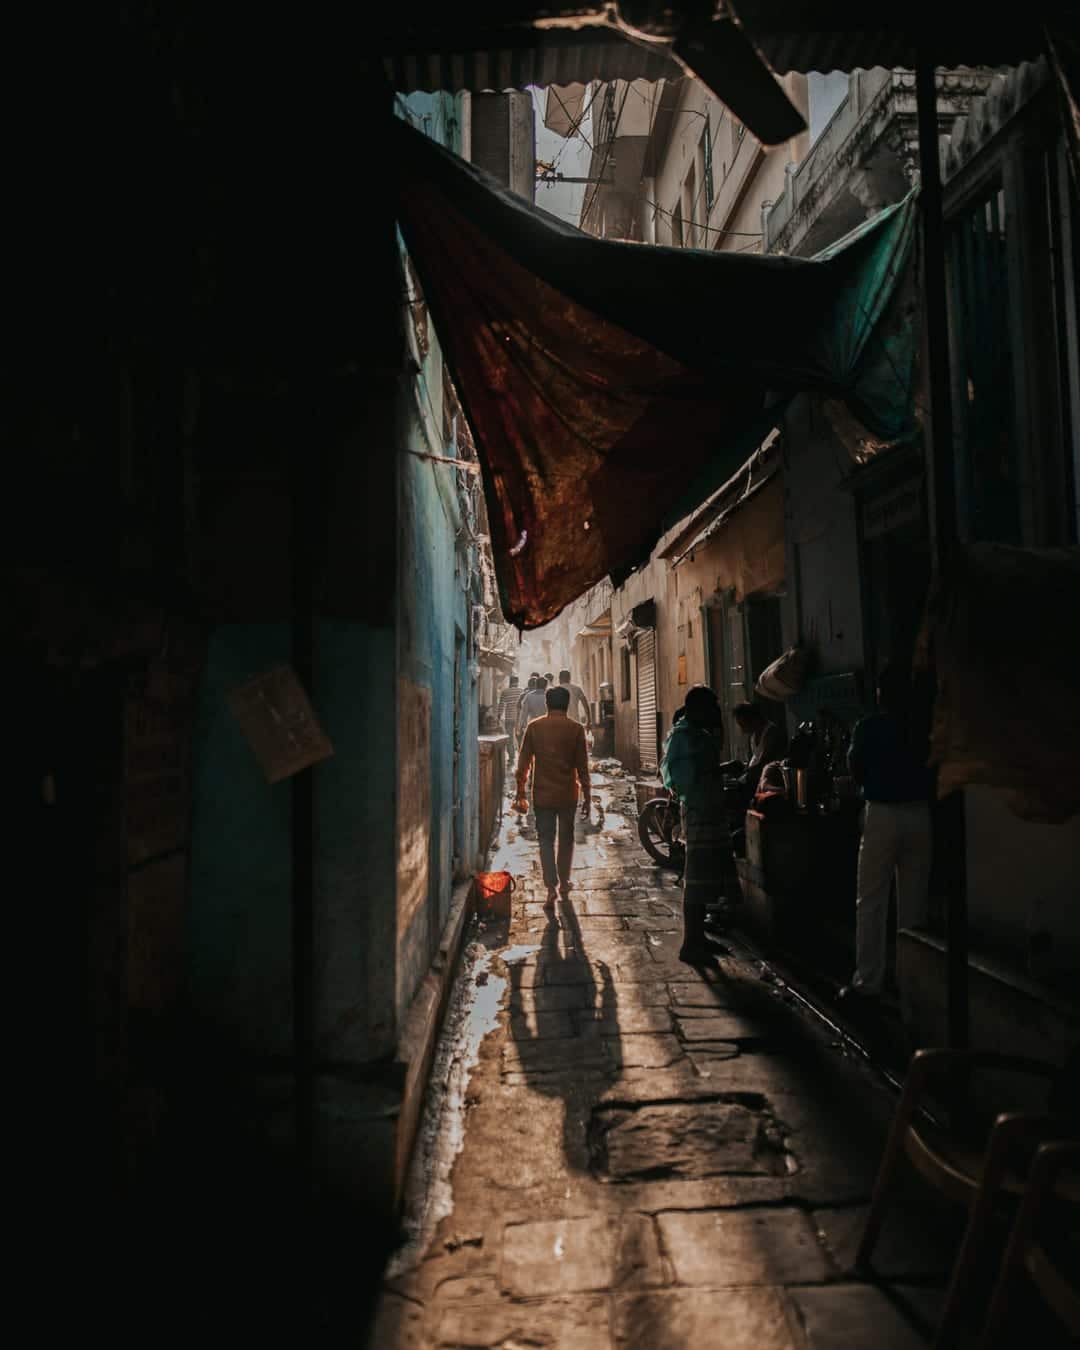 A street in India